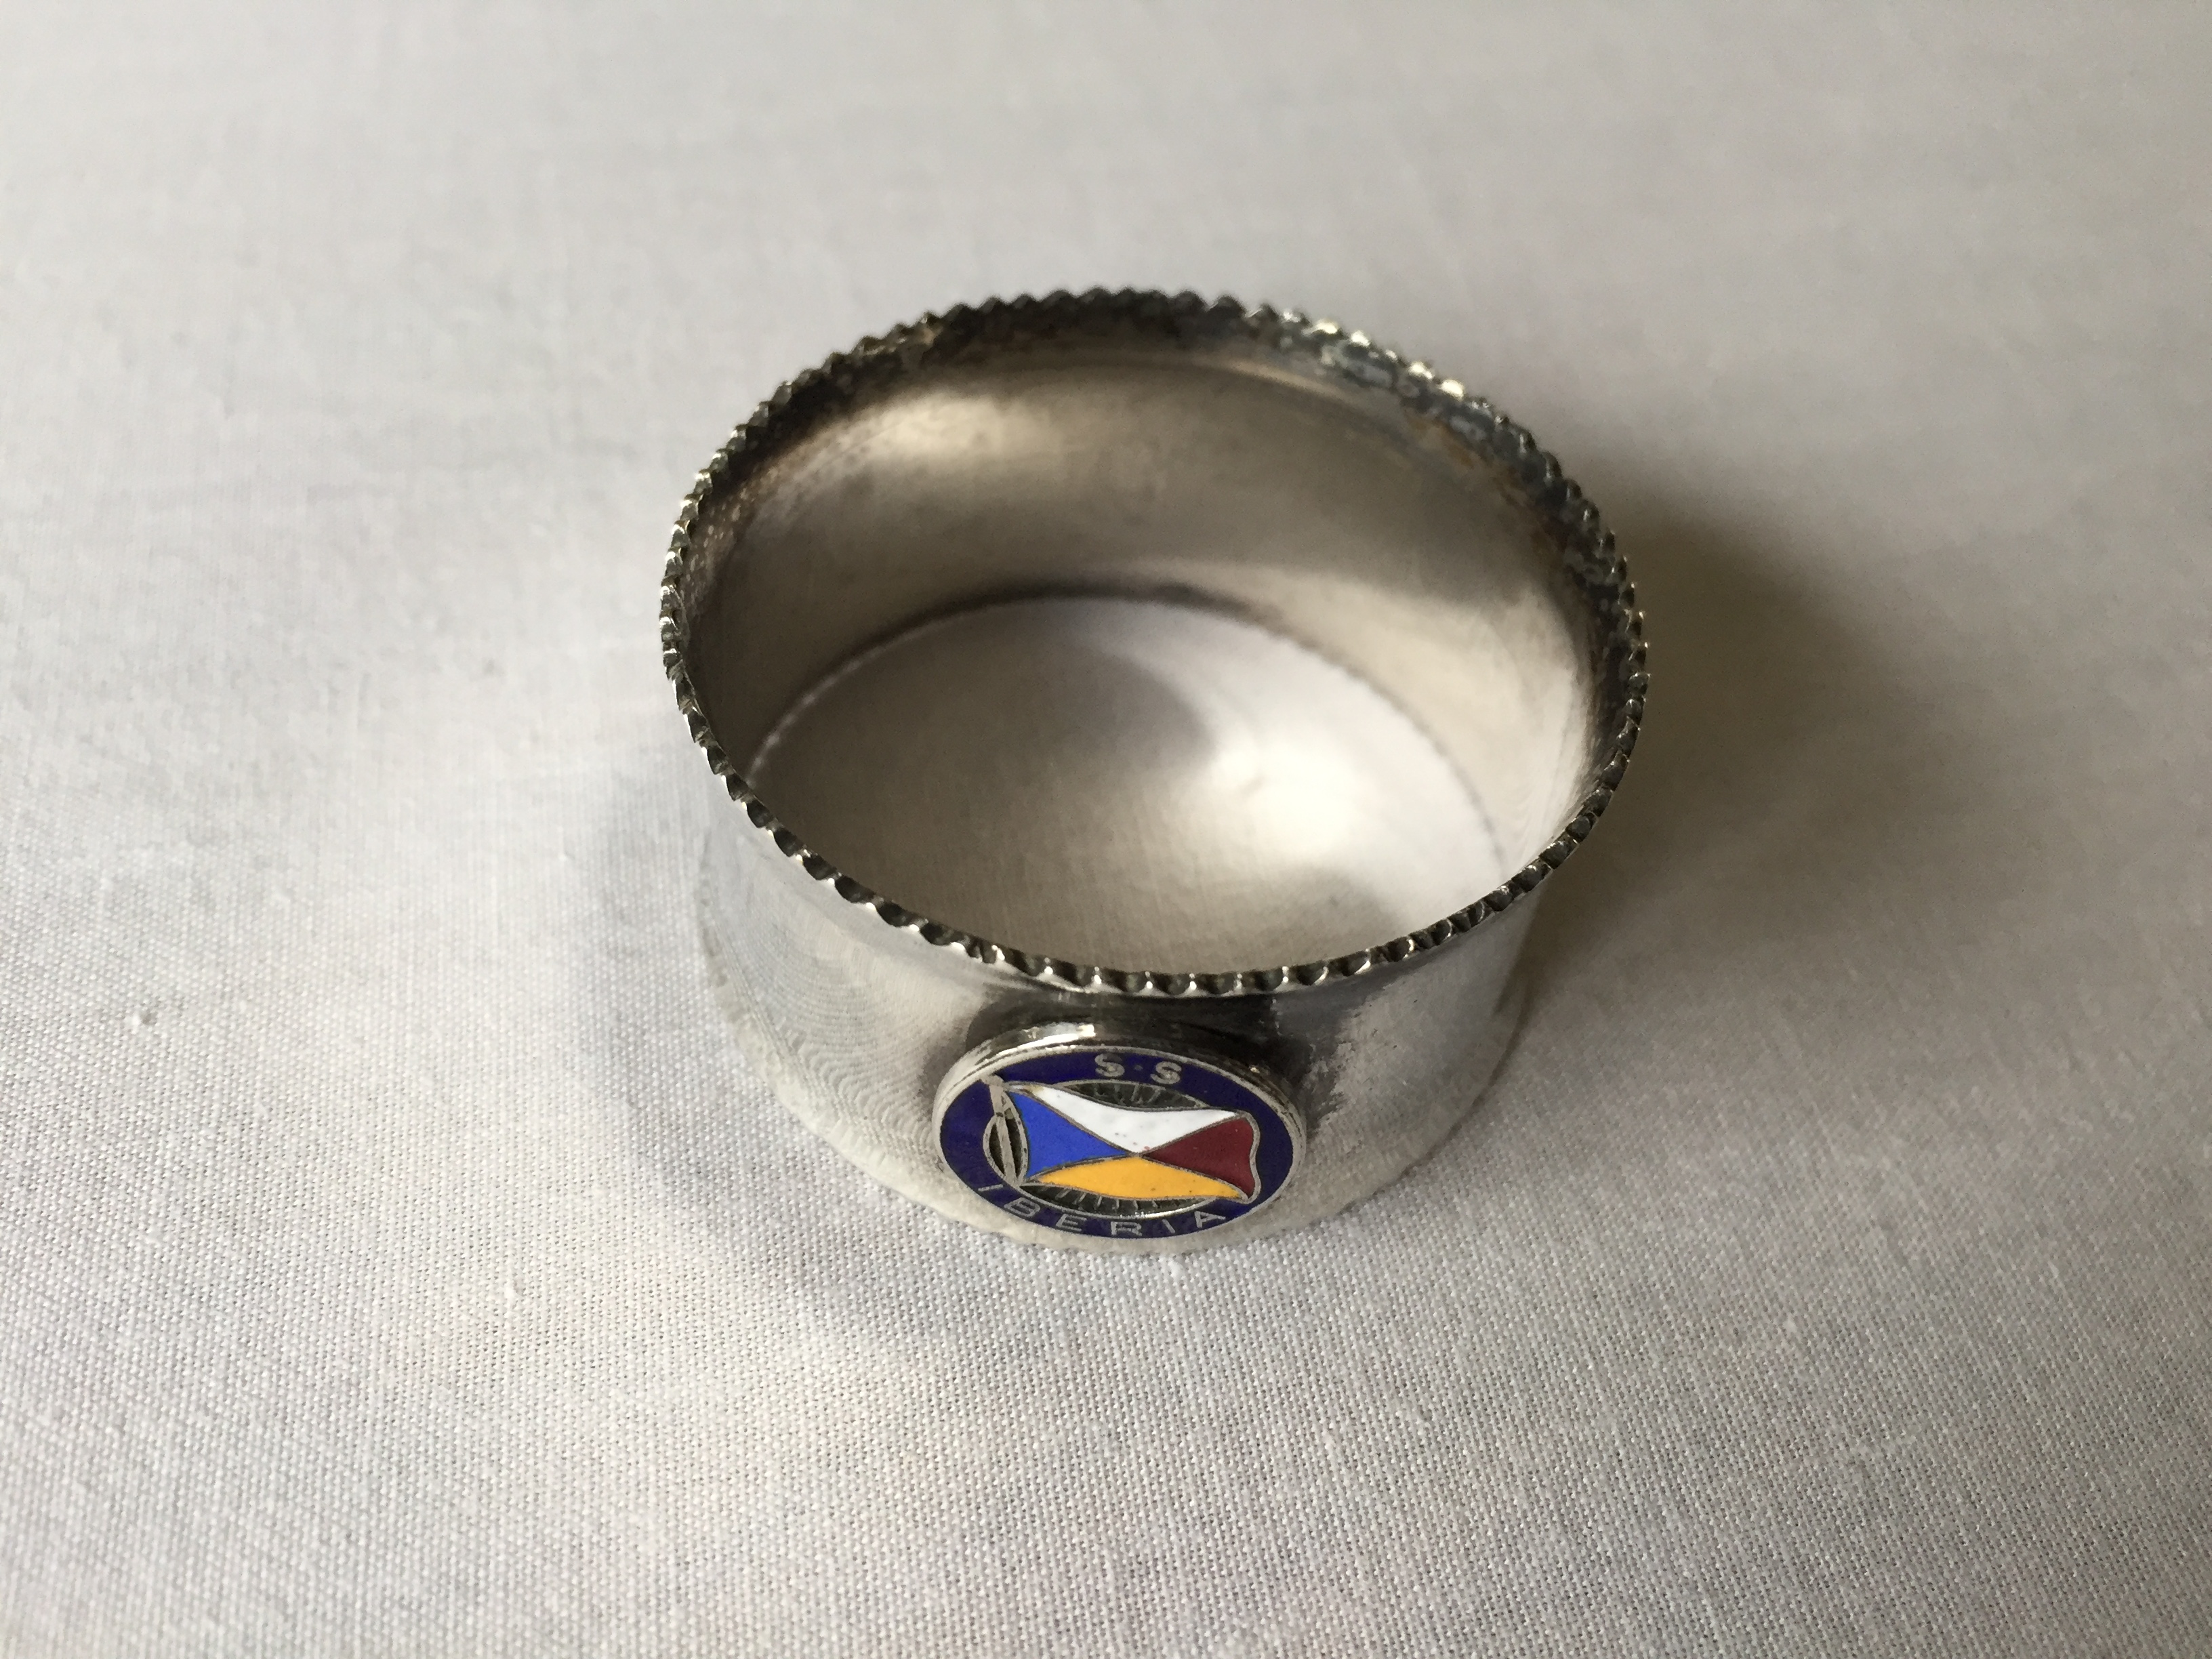 EARLY NAPKIN RING FROM THE P&O LINE VESSEL THE SS IBERIA